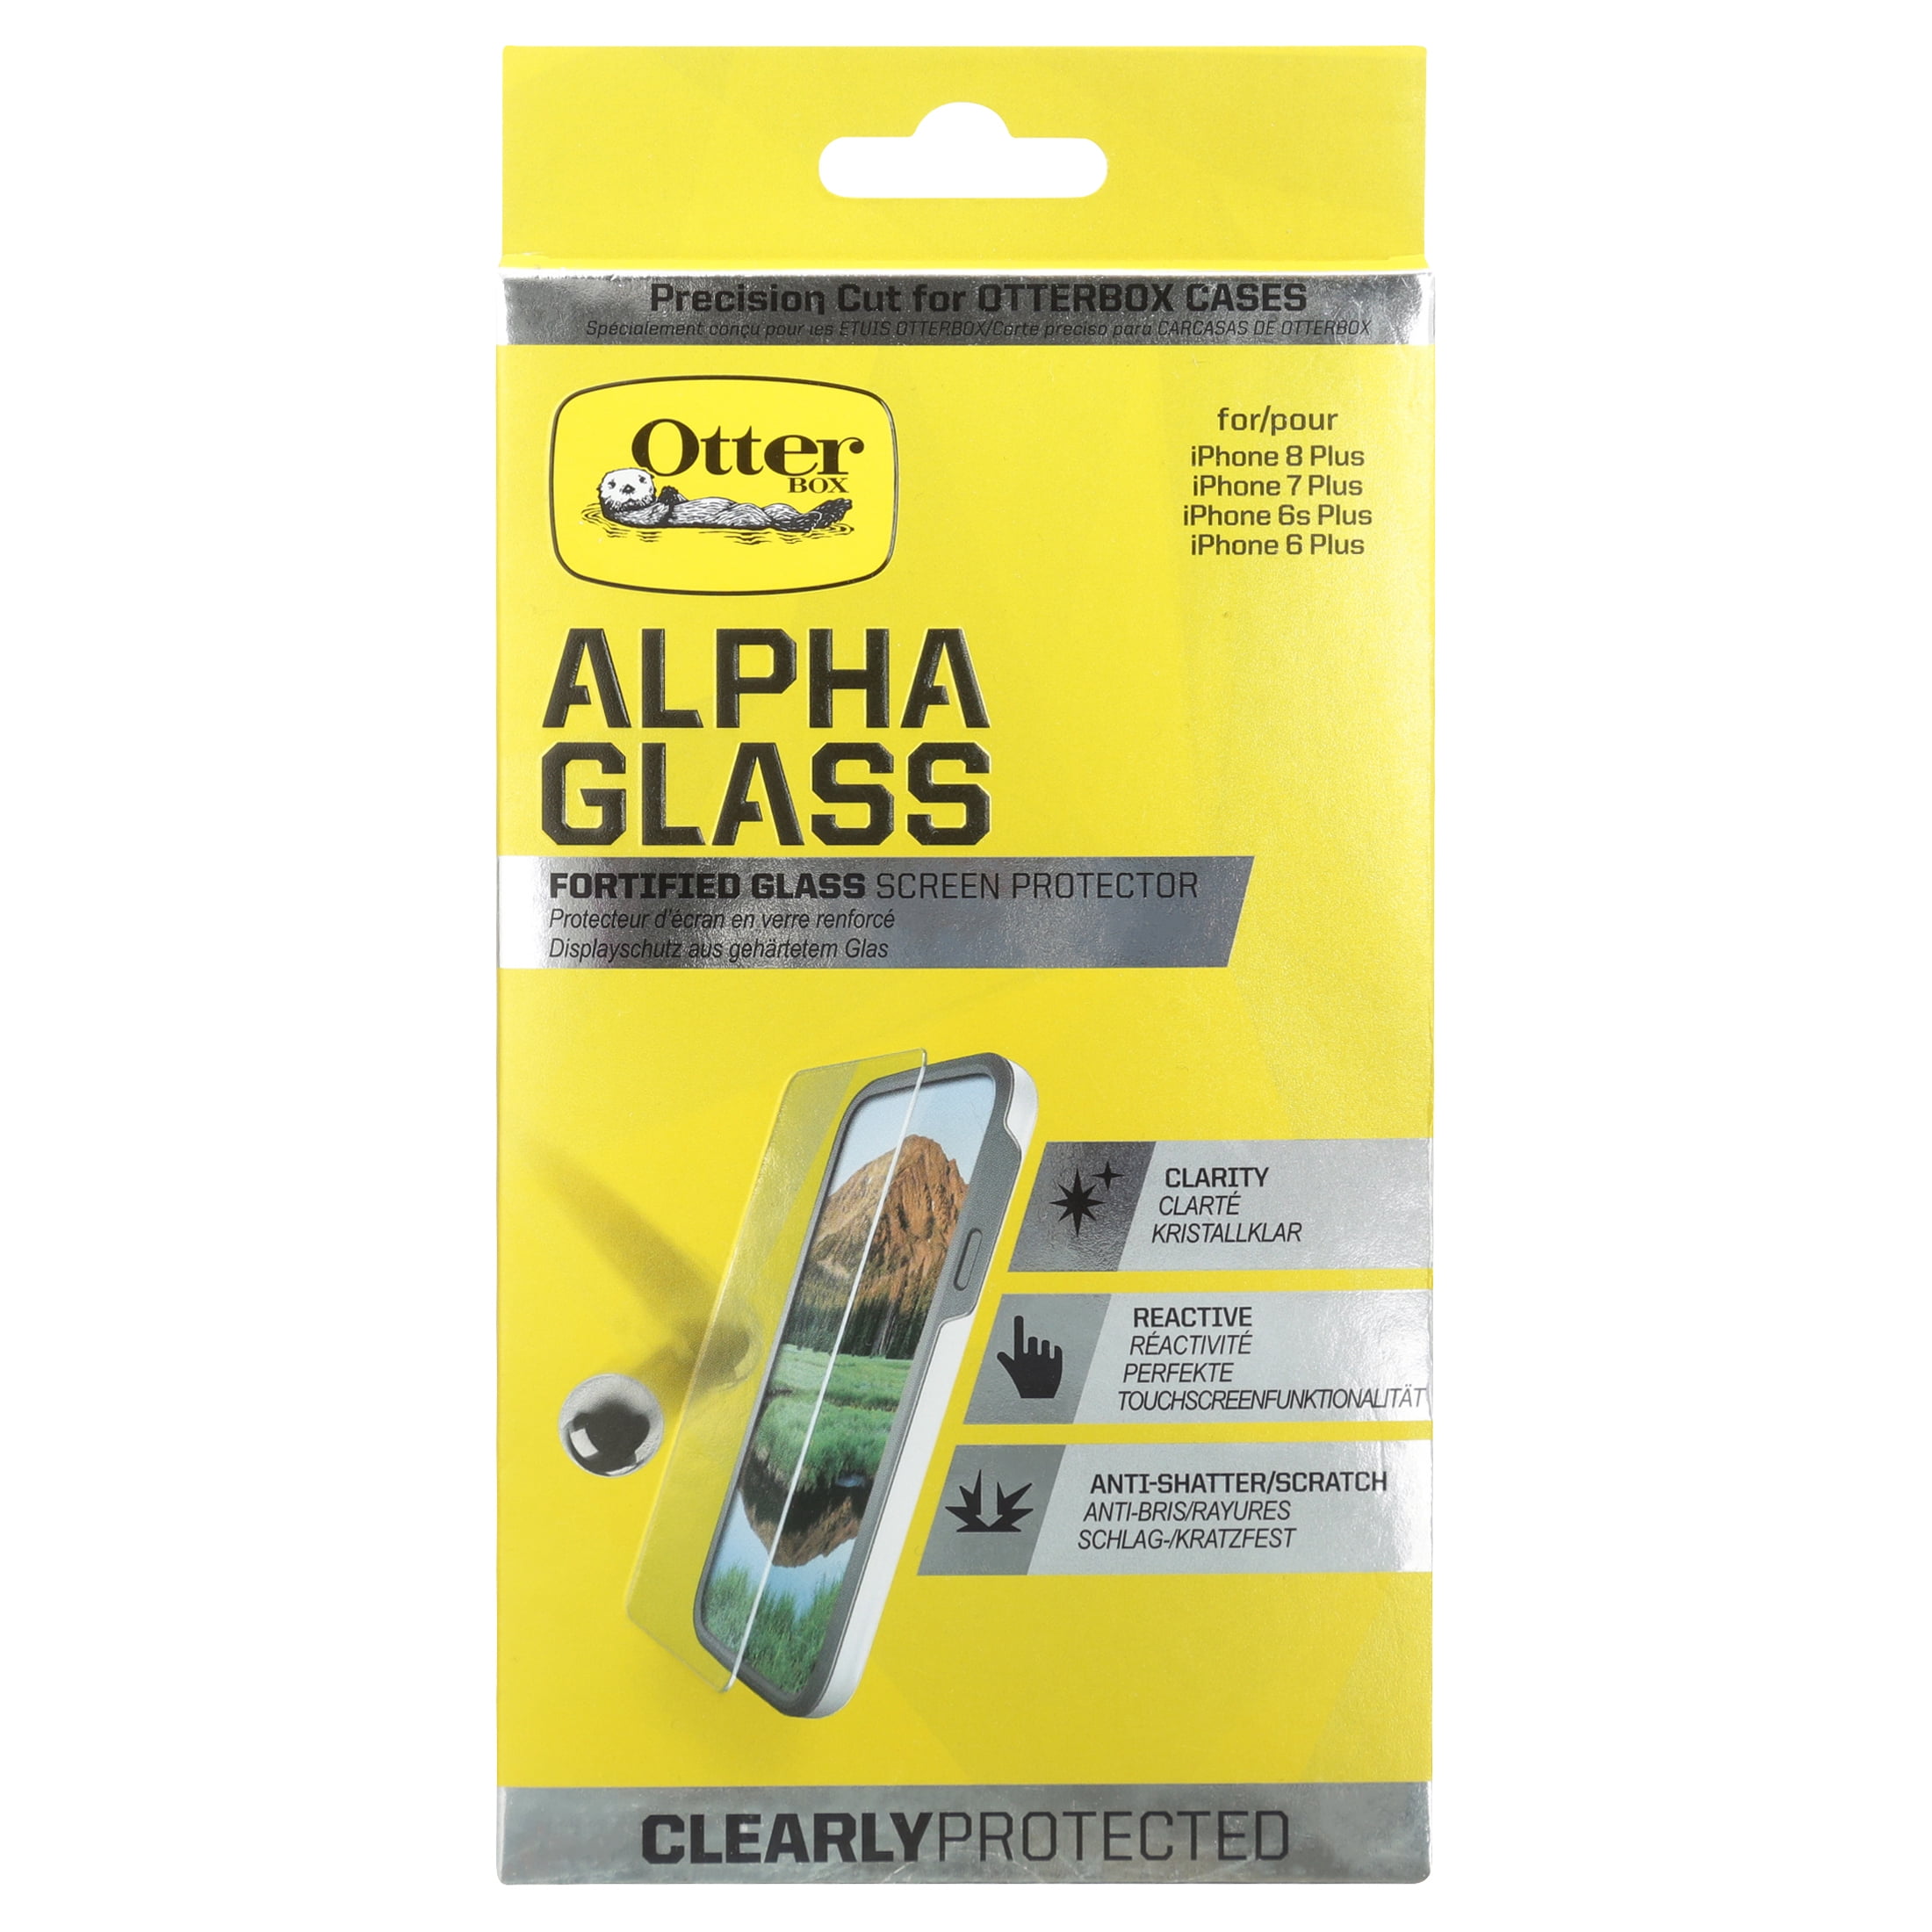 OtterBox Alpha Glass Protector for iPhone 8 Plus, iPhone 7 Plus, iPhone 6s Plus, iPhone 6 Plus - Clear - Walmart.com